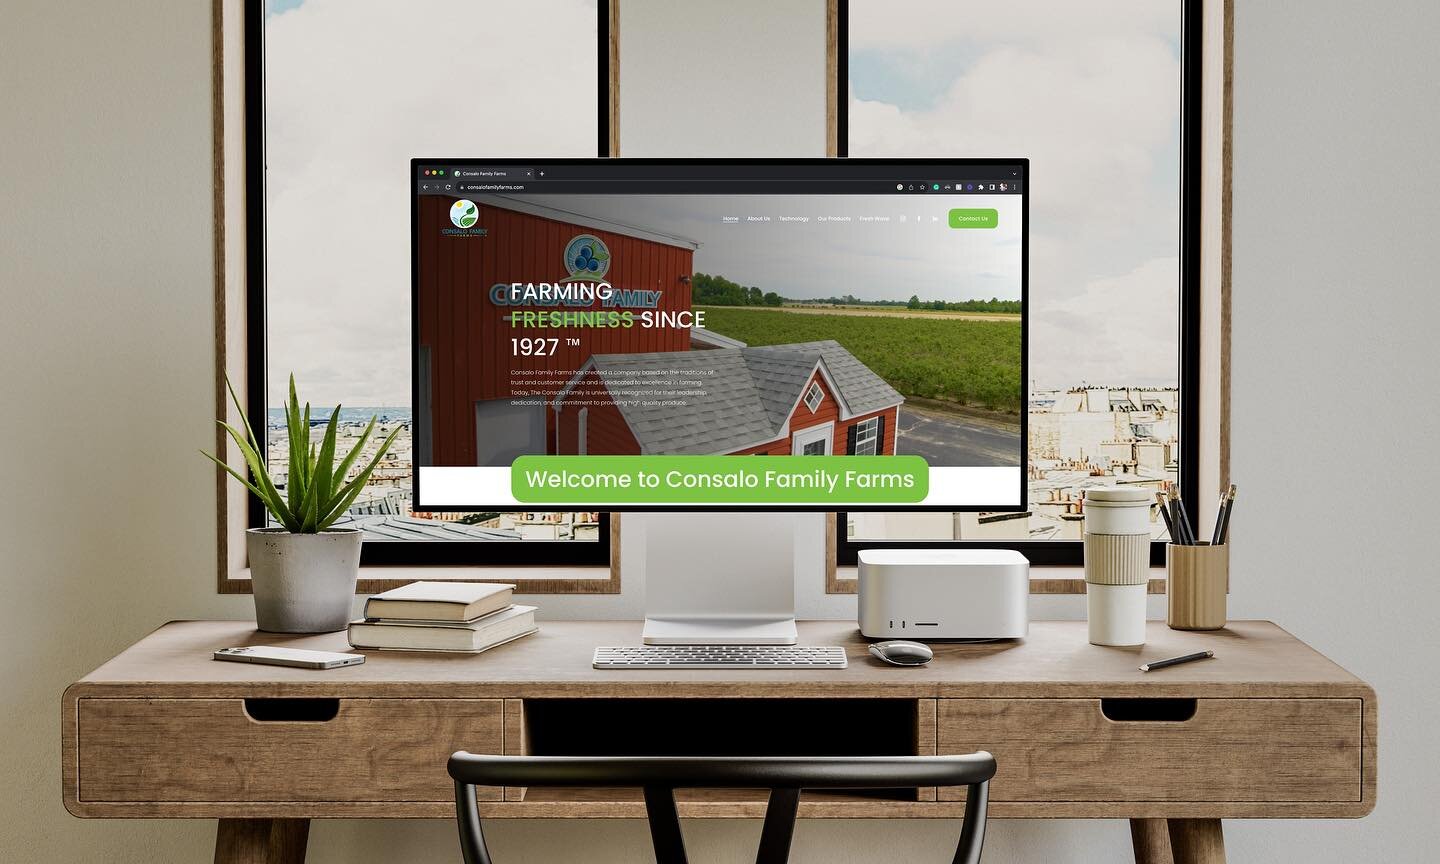 Big News from Consalo Family Farms! Our brand new website is officially LIVE and ready for you to explore! 🖥️

Discover our farm fresh products, services and more. Link is in our bio 👍🏼

👨🏻&zwj;🌾 Family owned grower, packer, shipper, importer, 